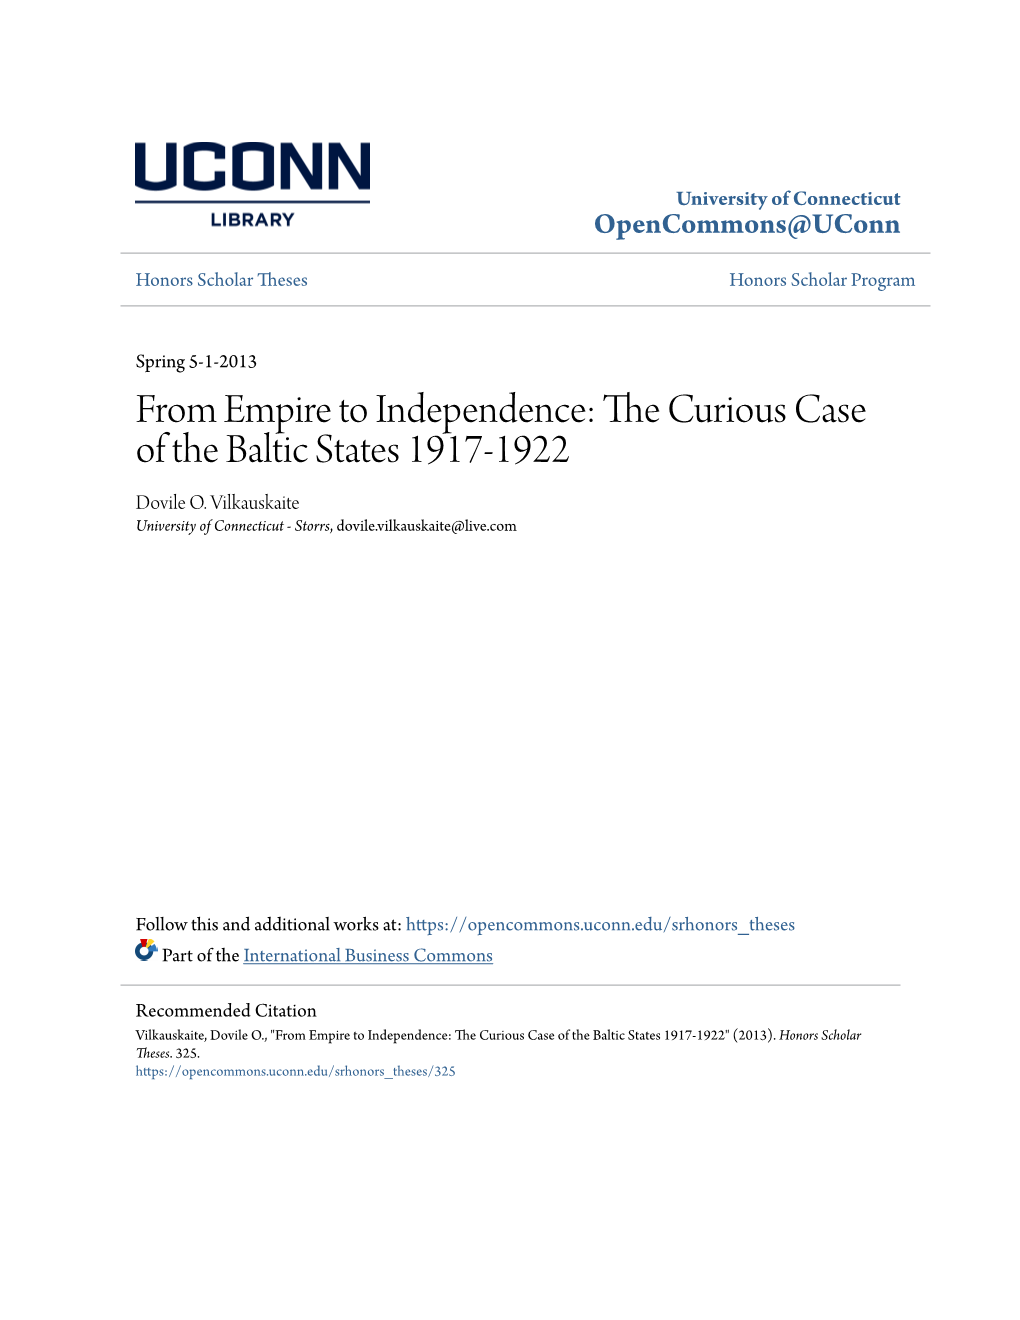 From Empire to Independence: the Curious Case of the Baltic States